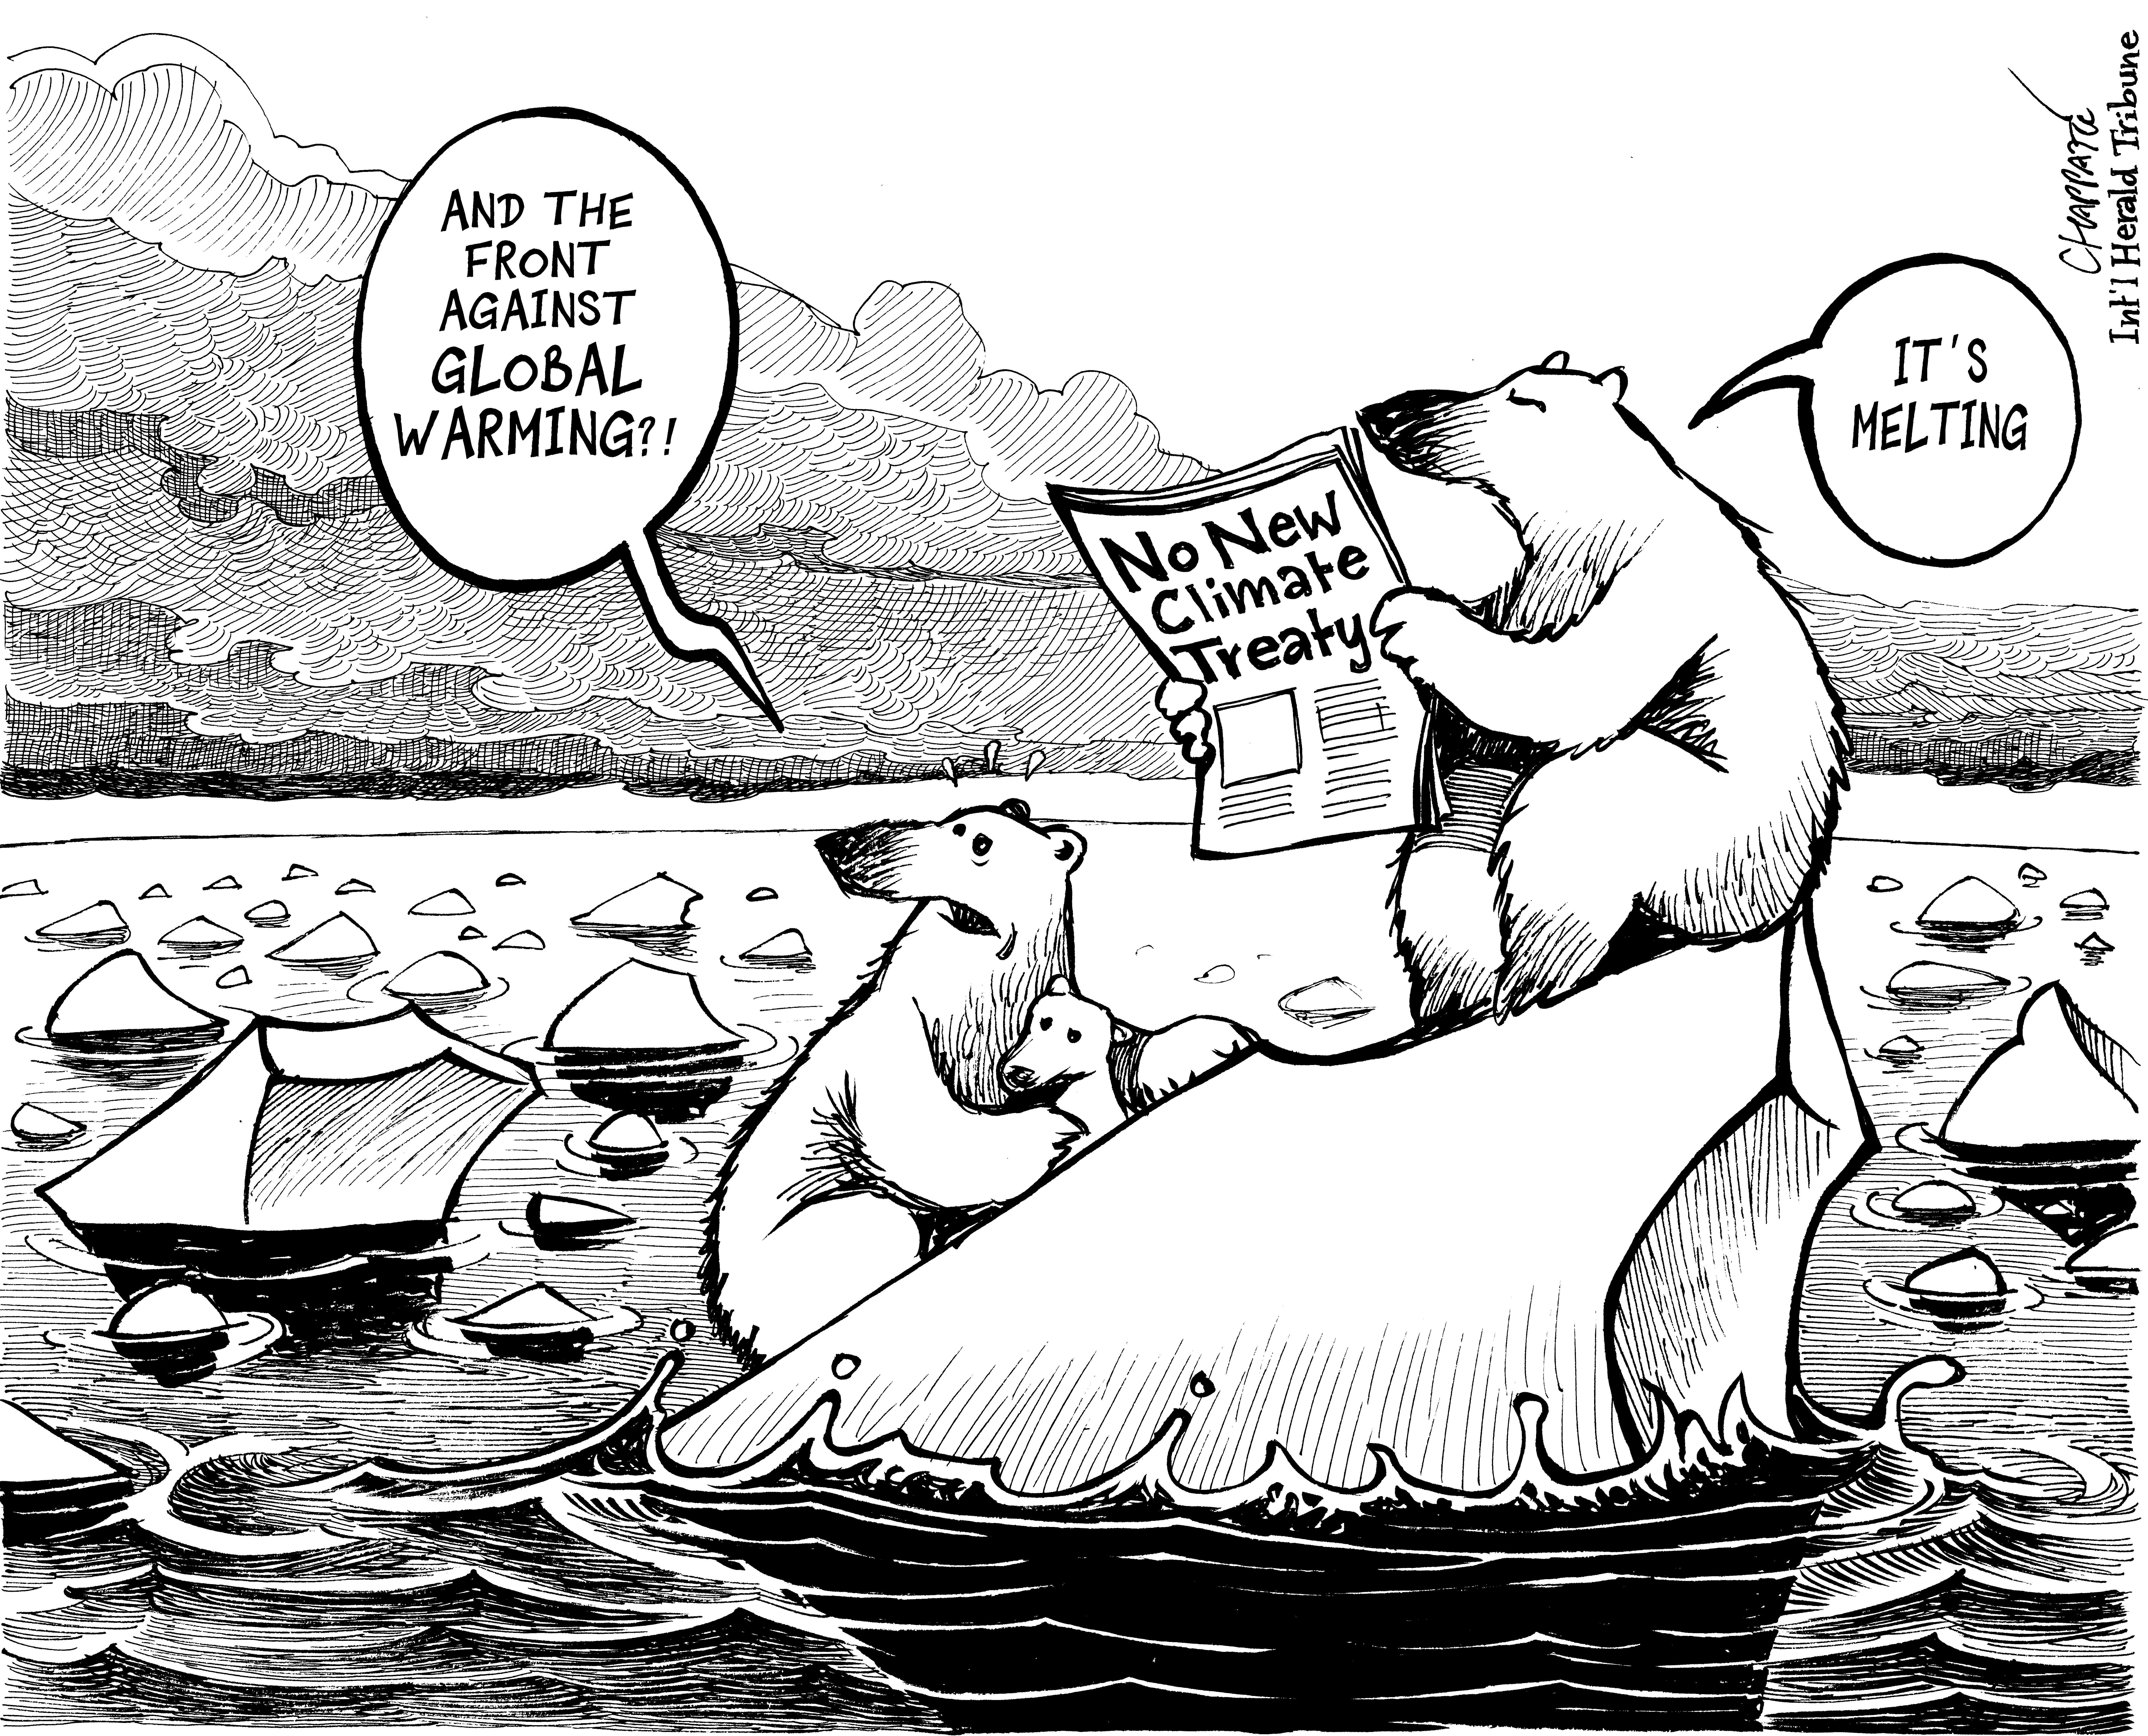 The fight against climate change